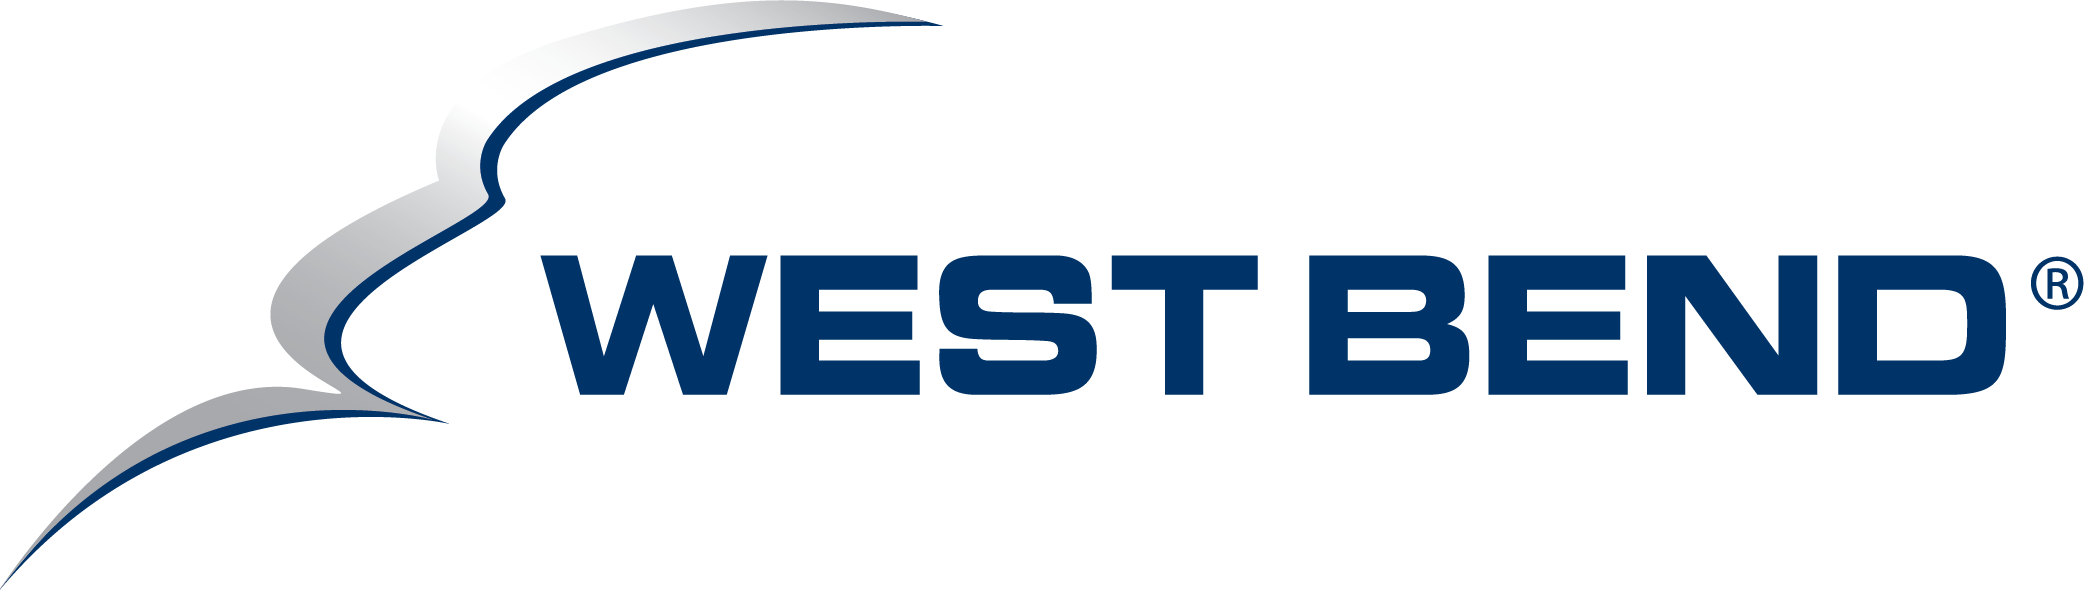 Westbend Insurance